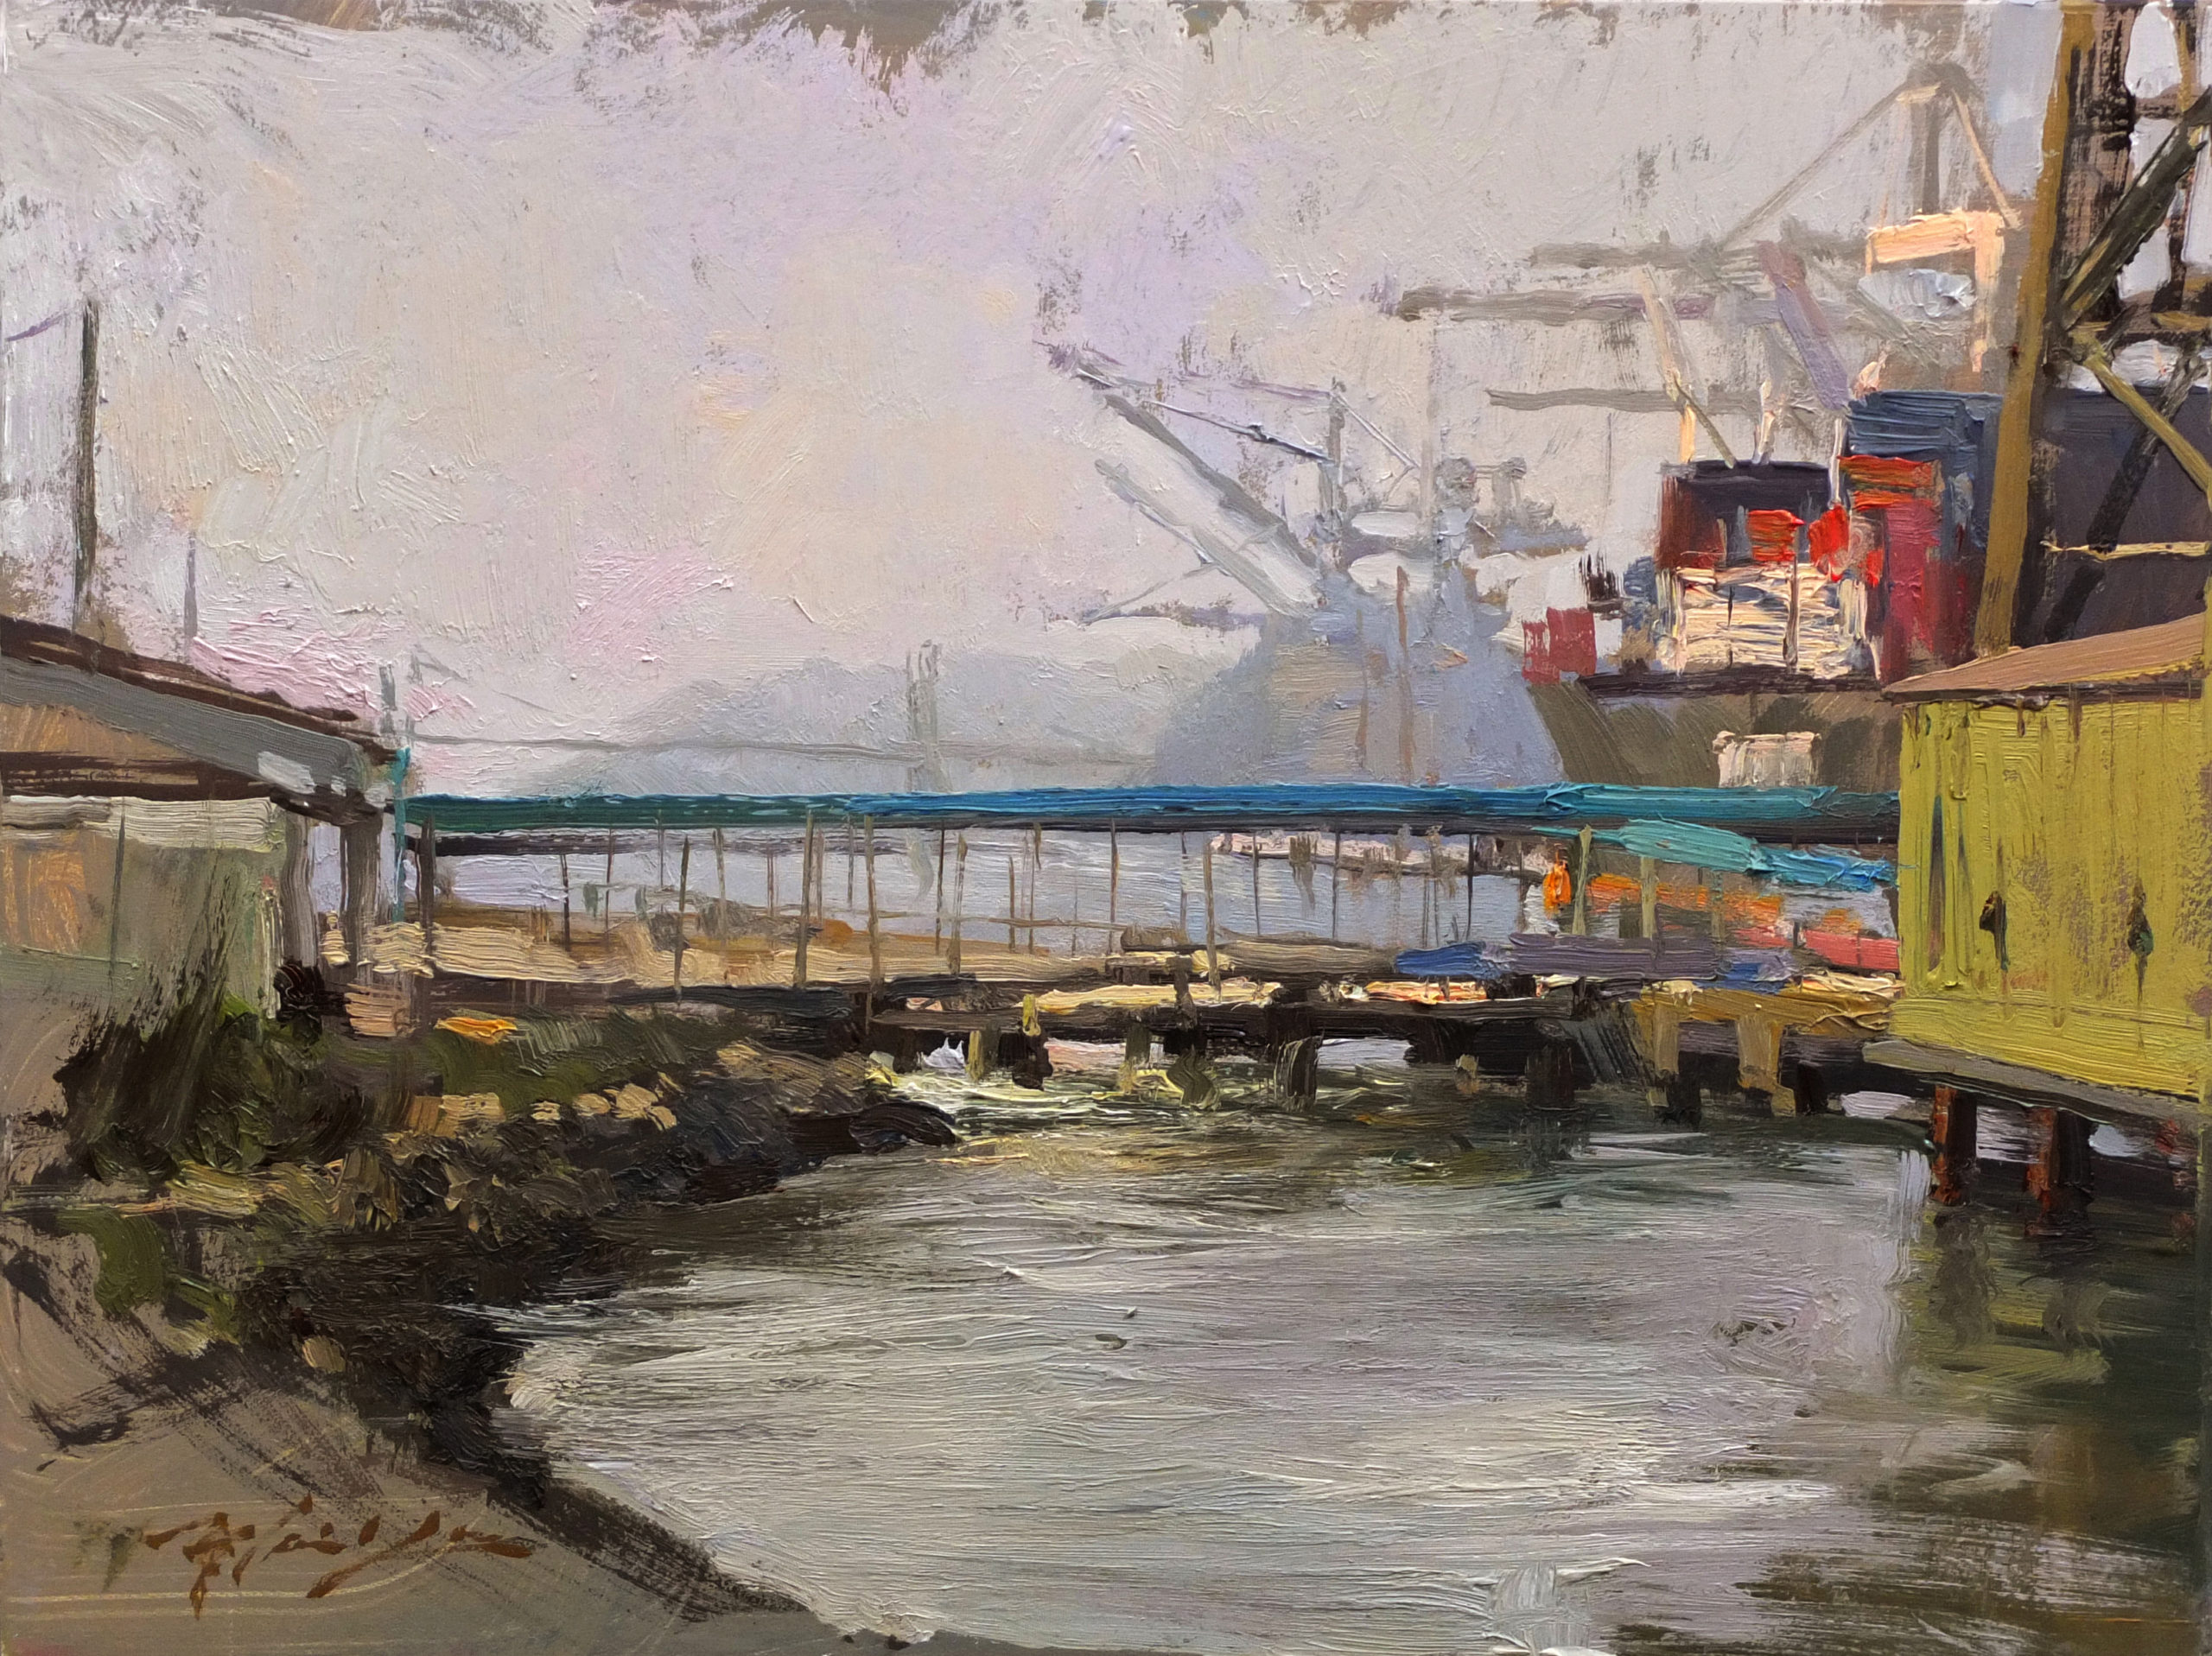 Hsin-Yao Tseng, "Alameda Terminal," 2013, oil, 9x 12 in. Private collection Plein air 